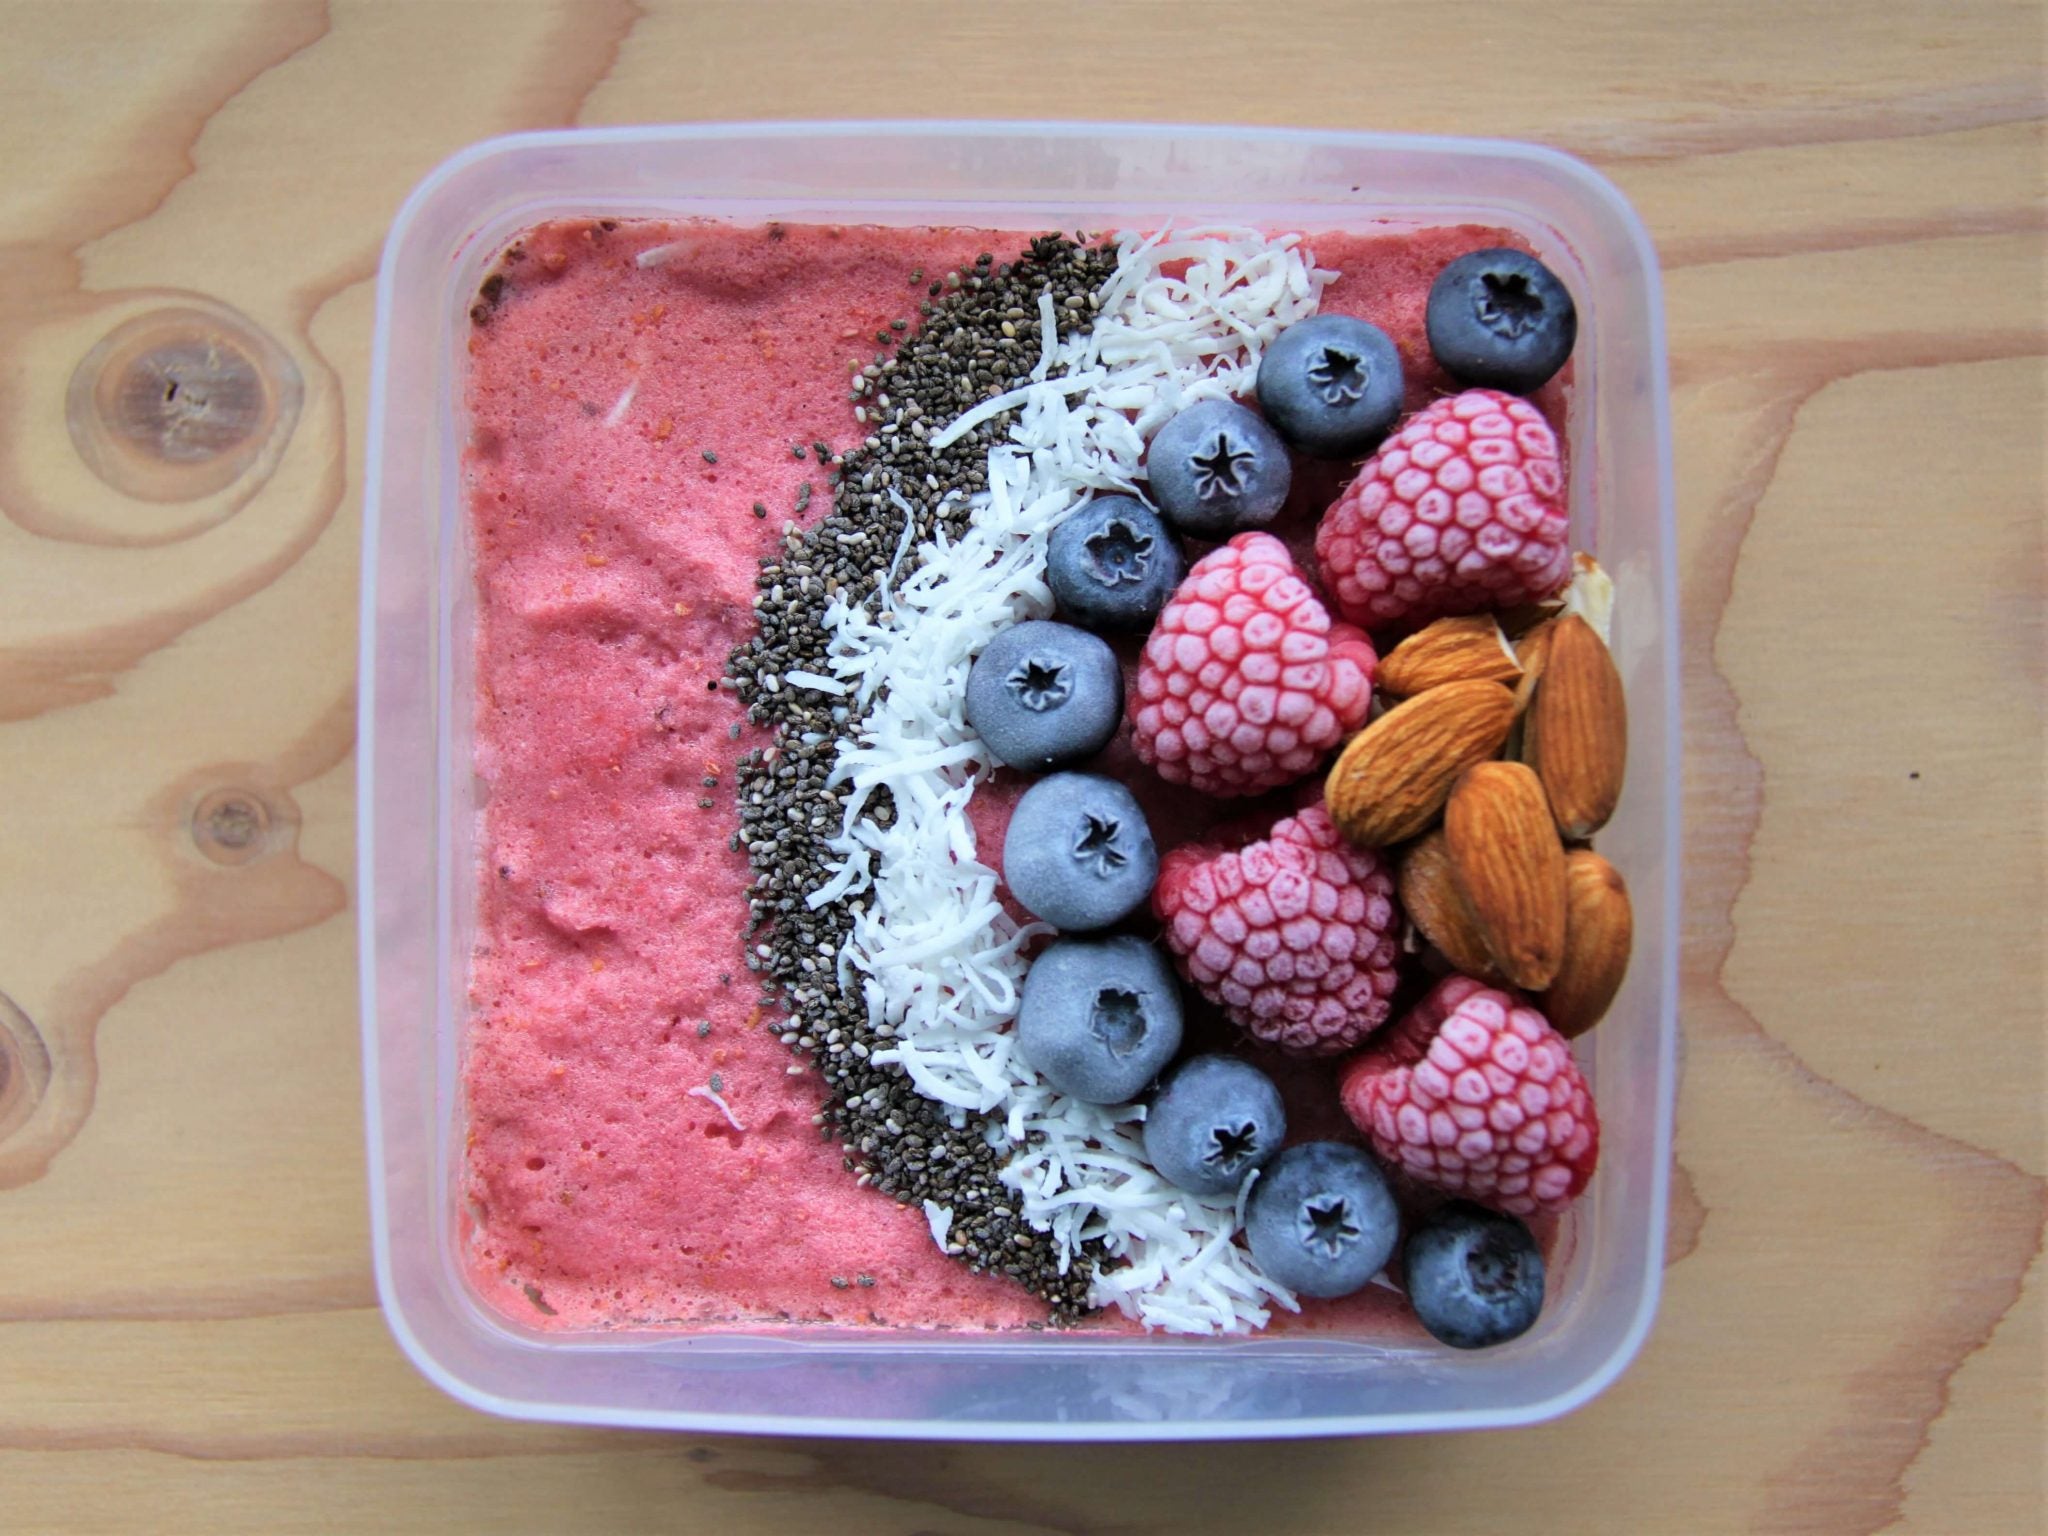 Pink smothie bowl with nuts and berries on top